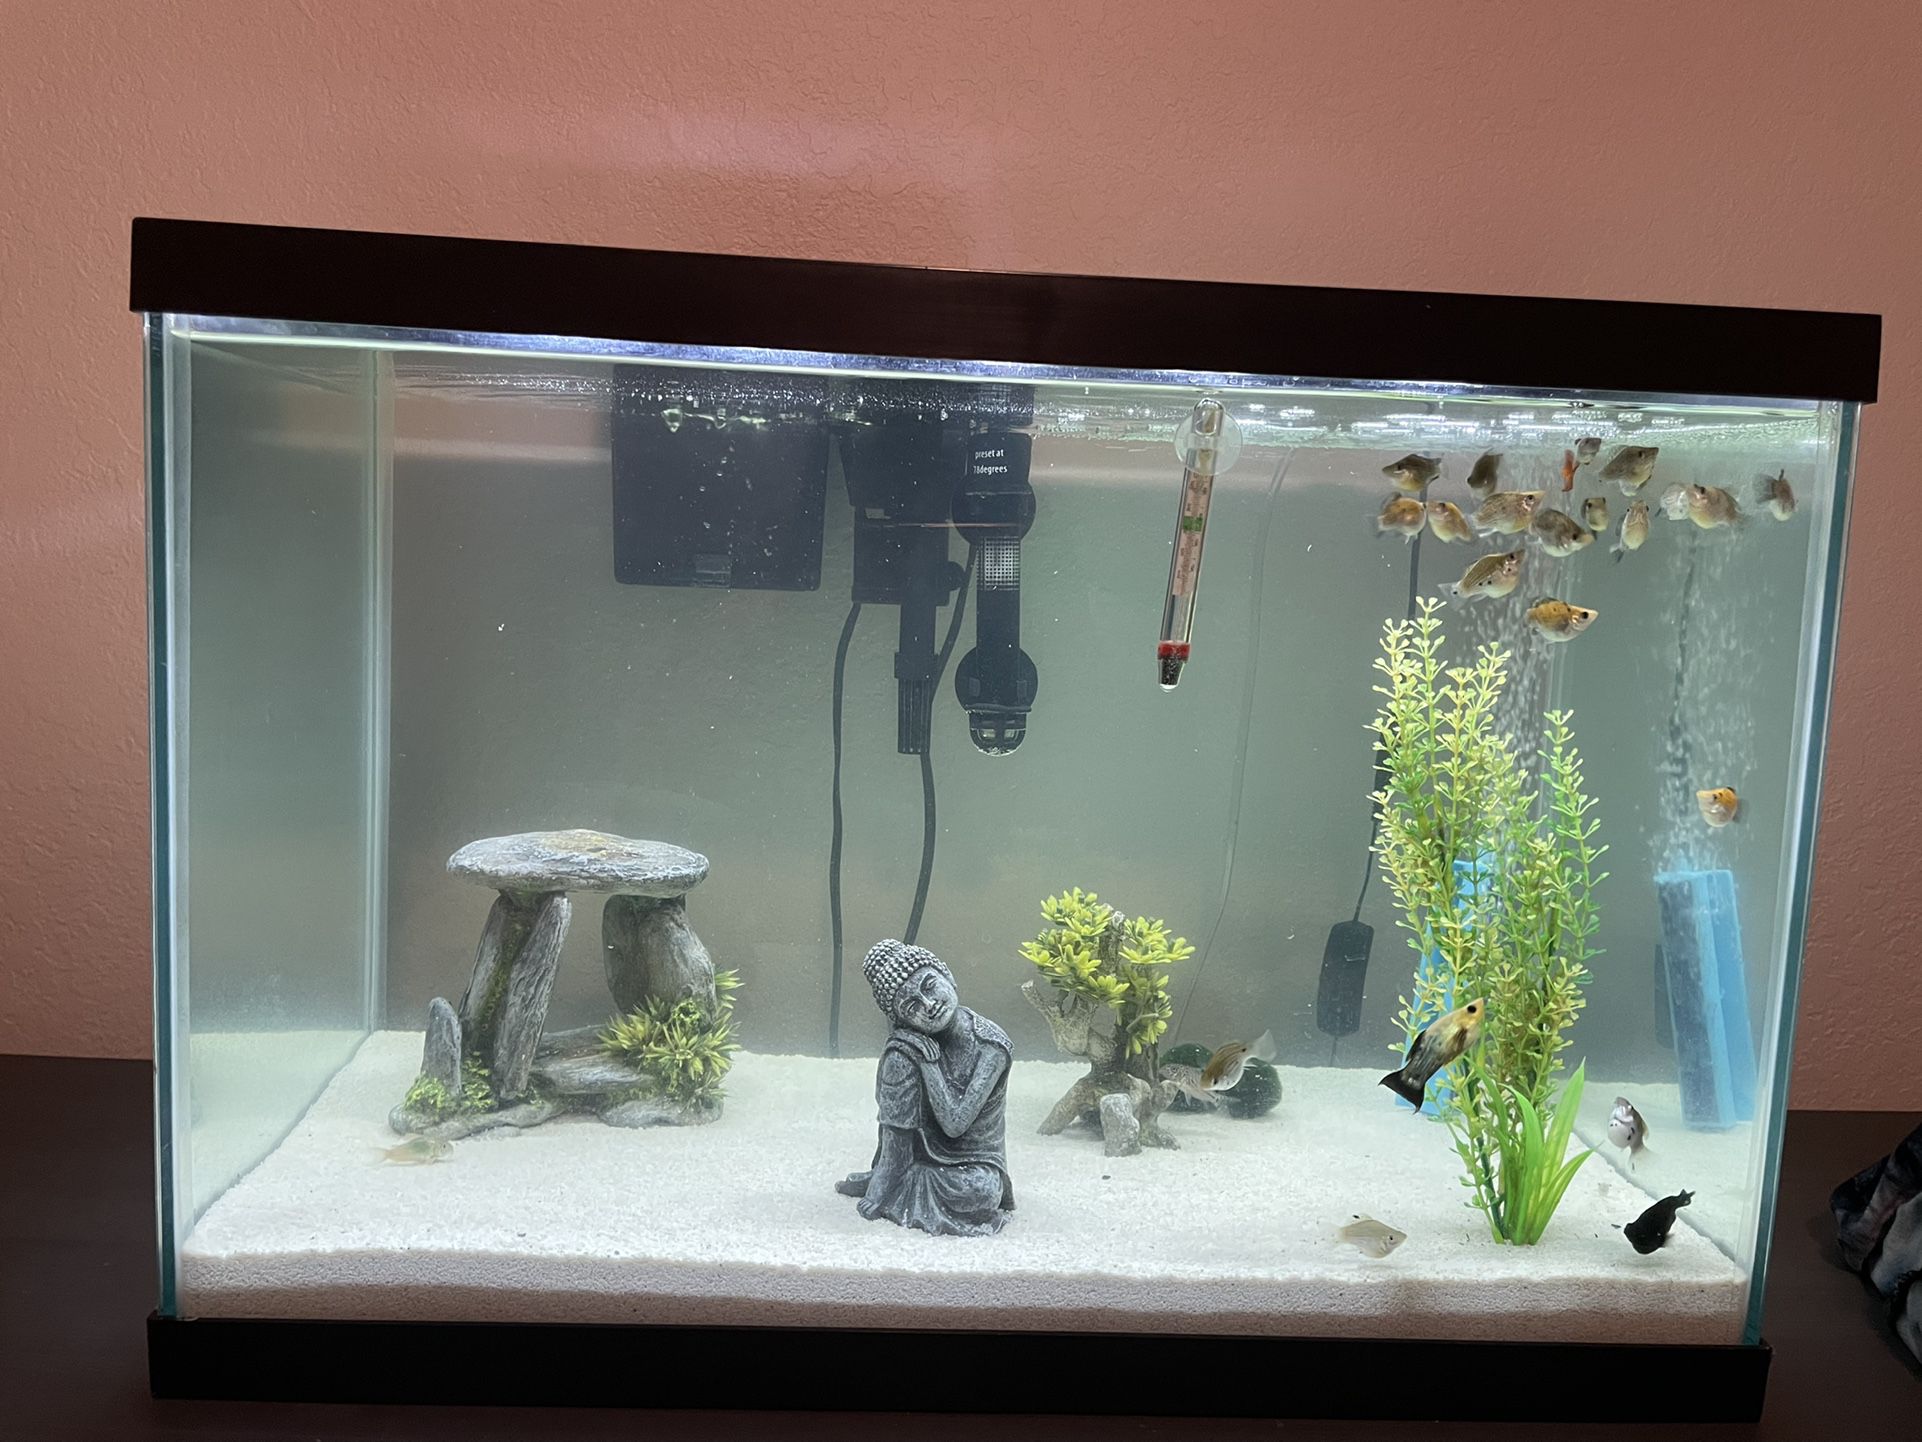 20 Gallon Fish Tanks With All Accessories And Little Friends